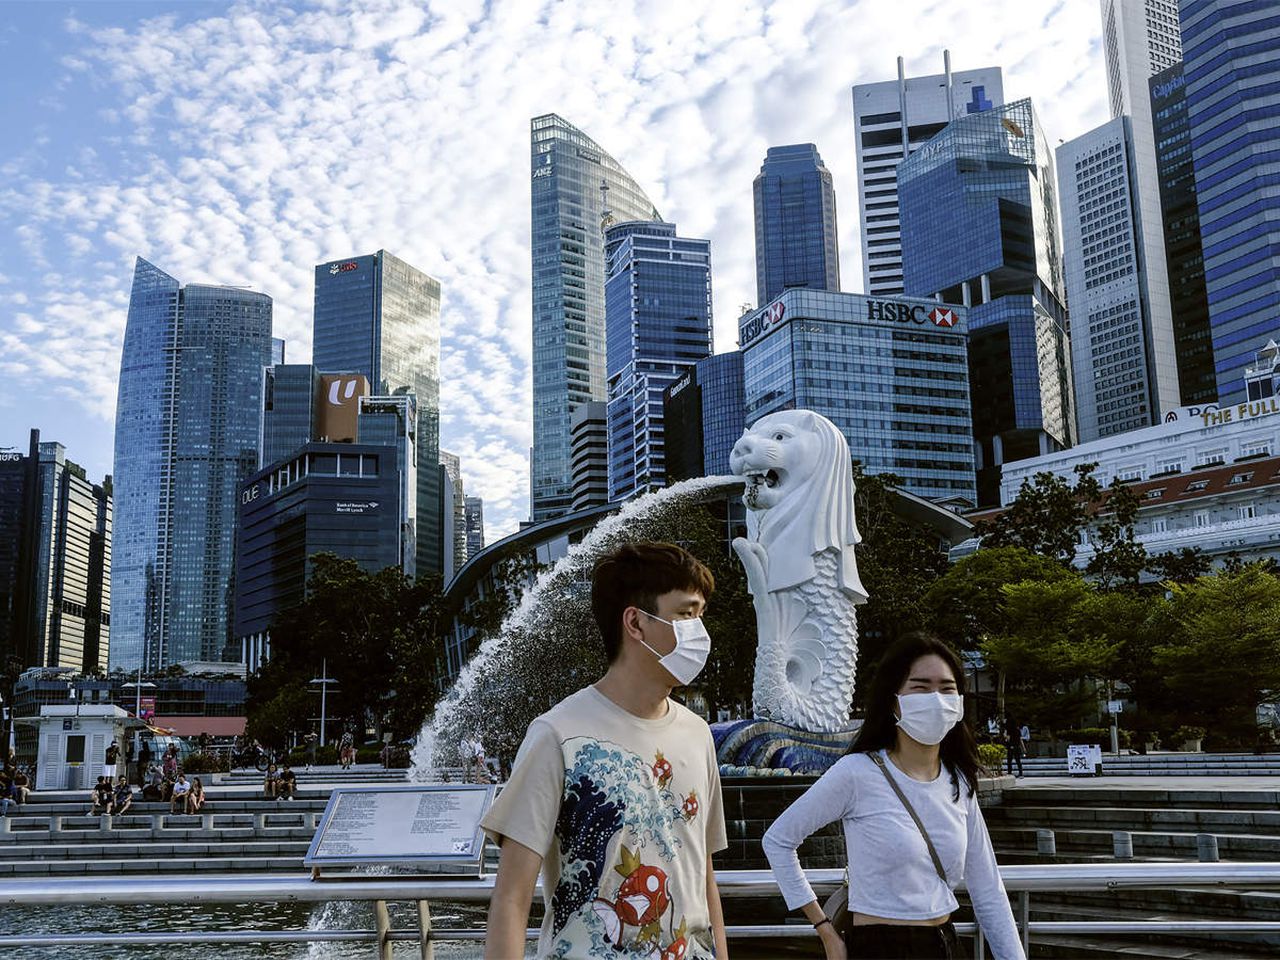 Singapore reopens after two months of lockdown